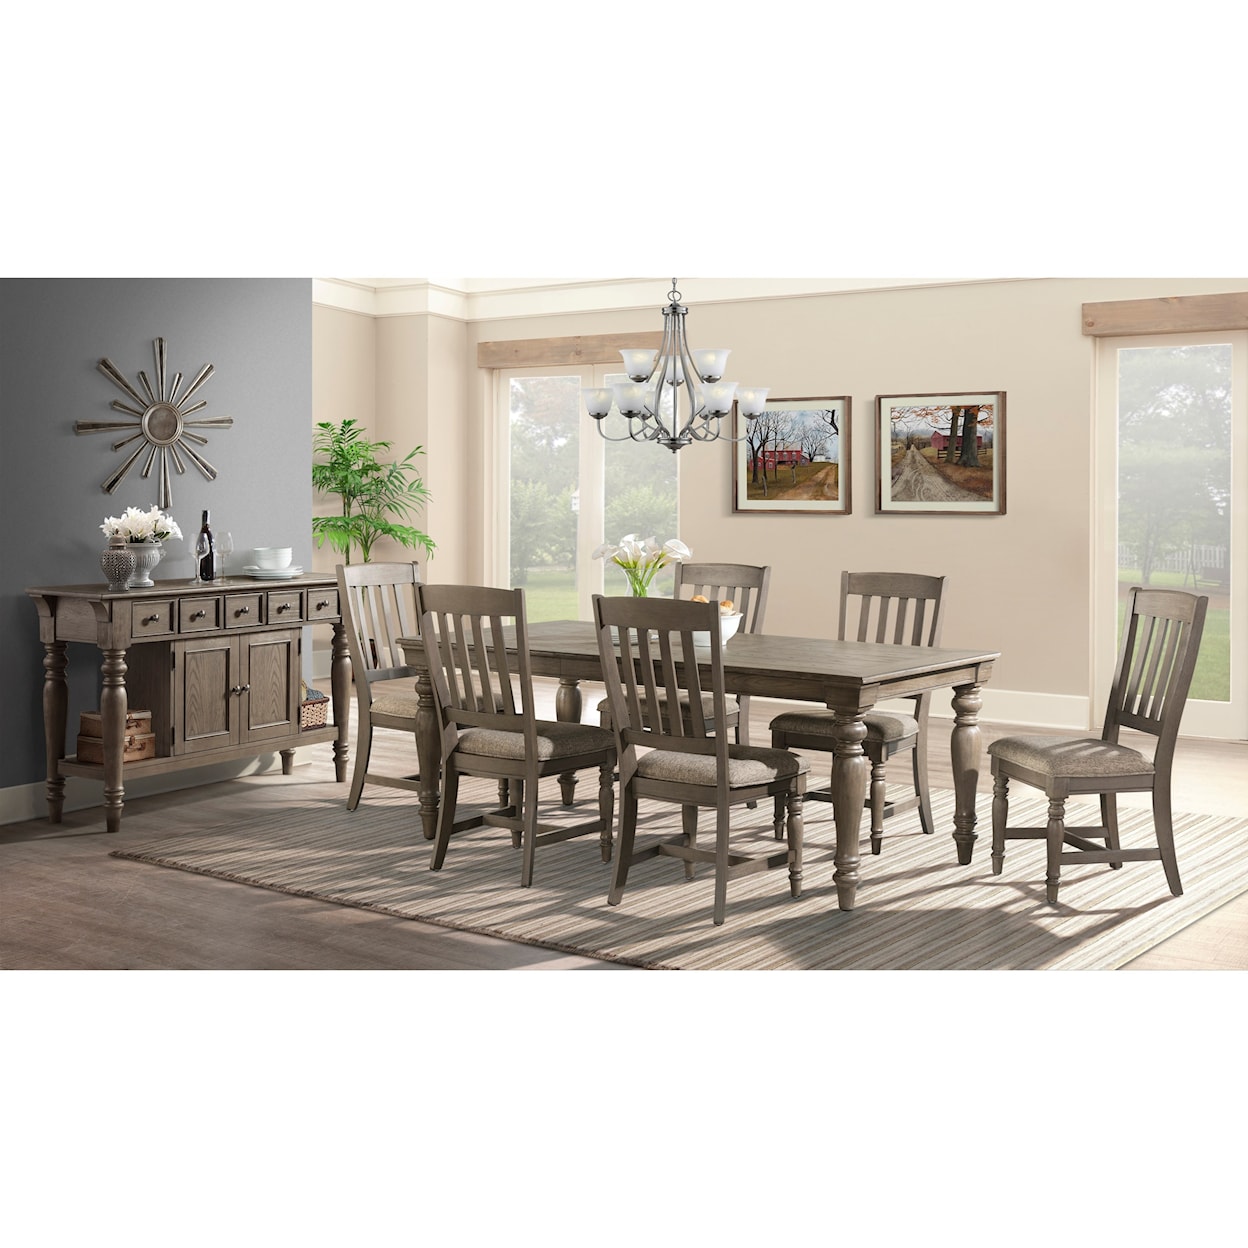 Intercon Balboa Park 7 Piece Table and Chair Set